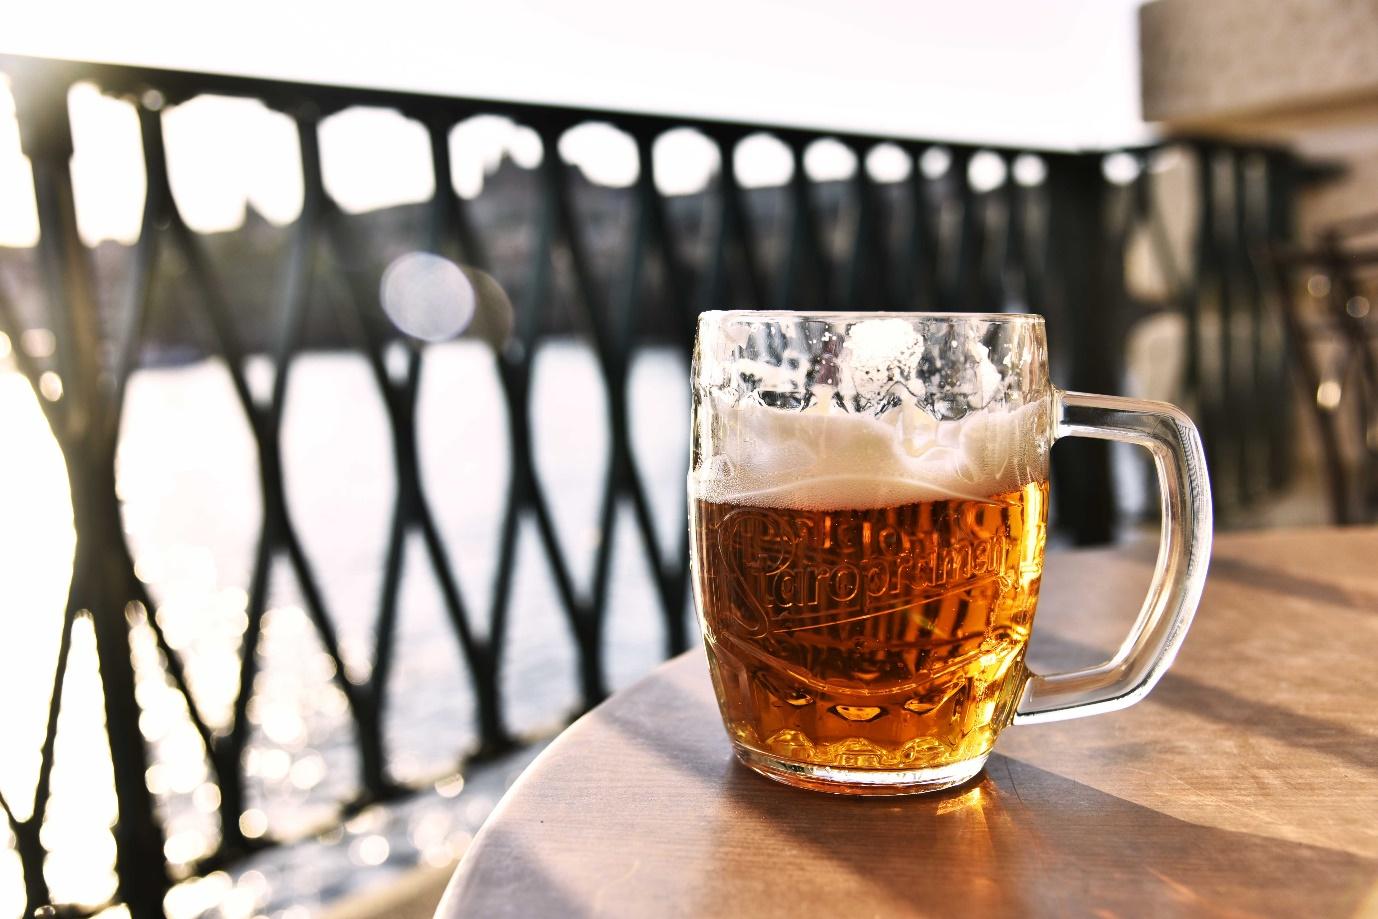  A glass of beer is kept on the table.